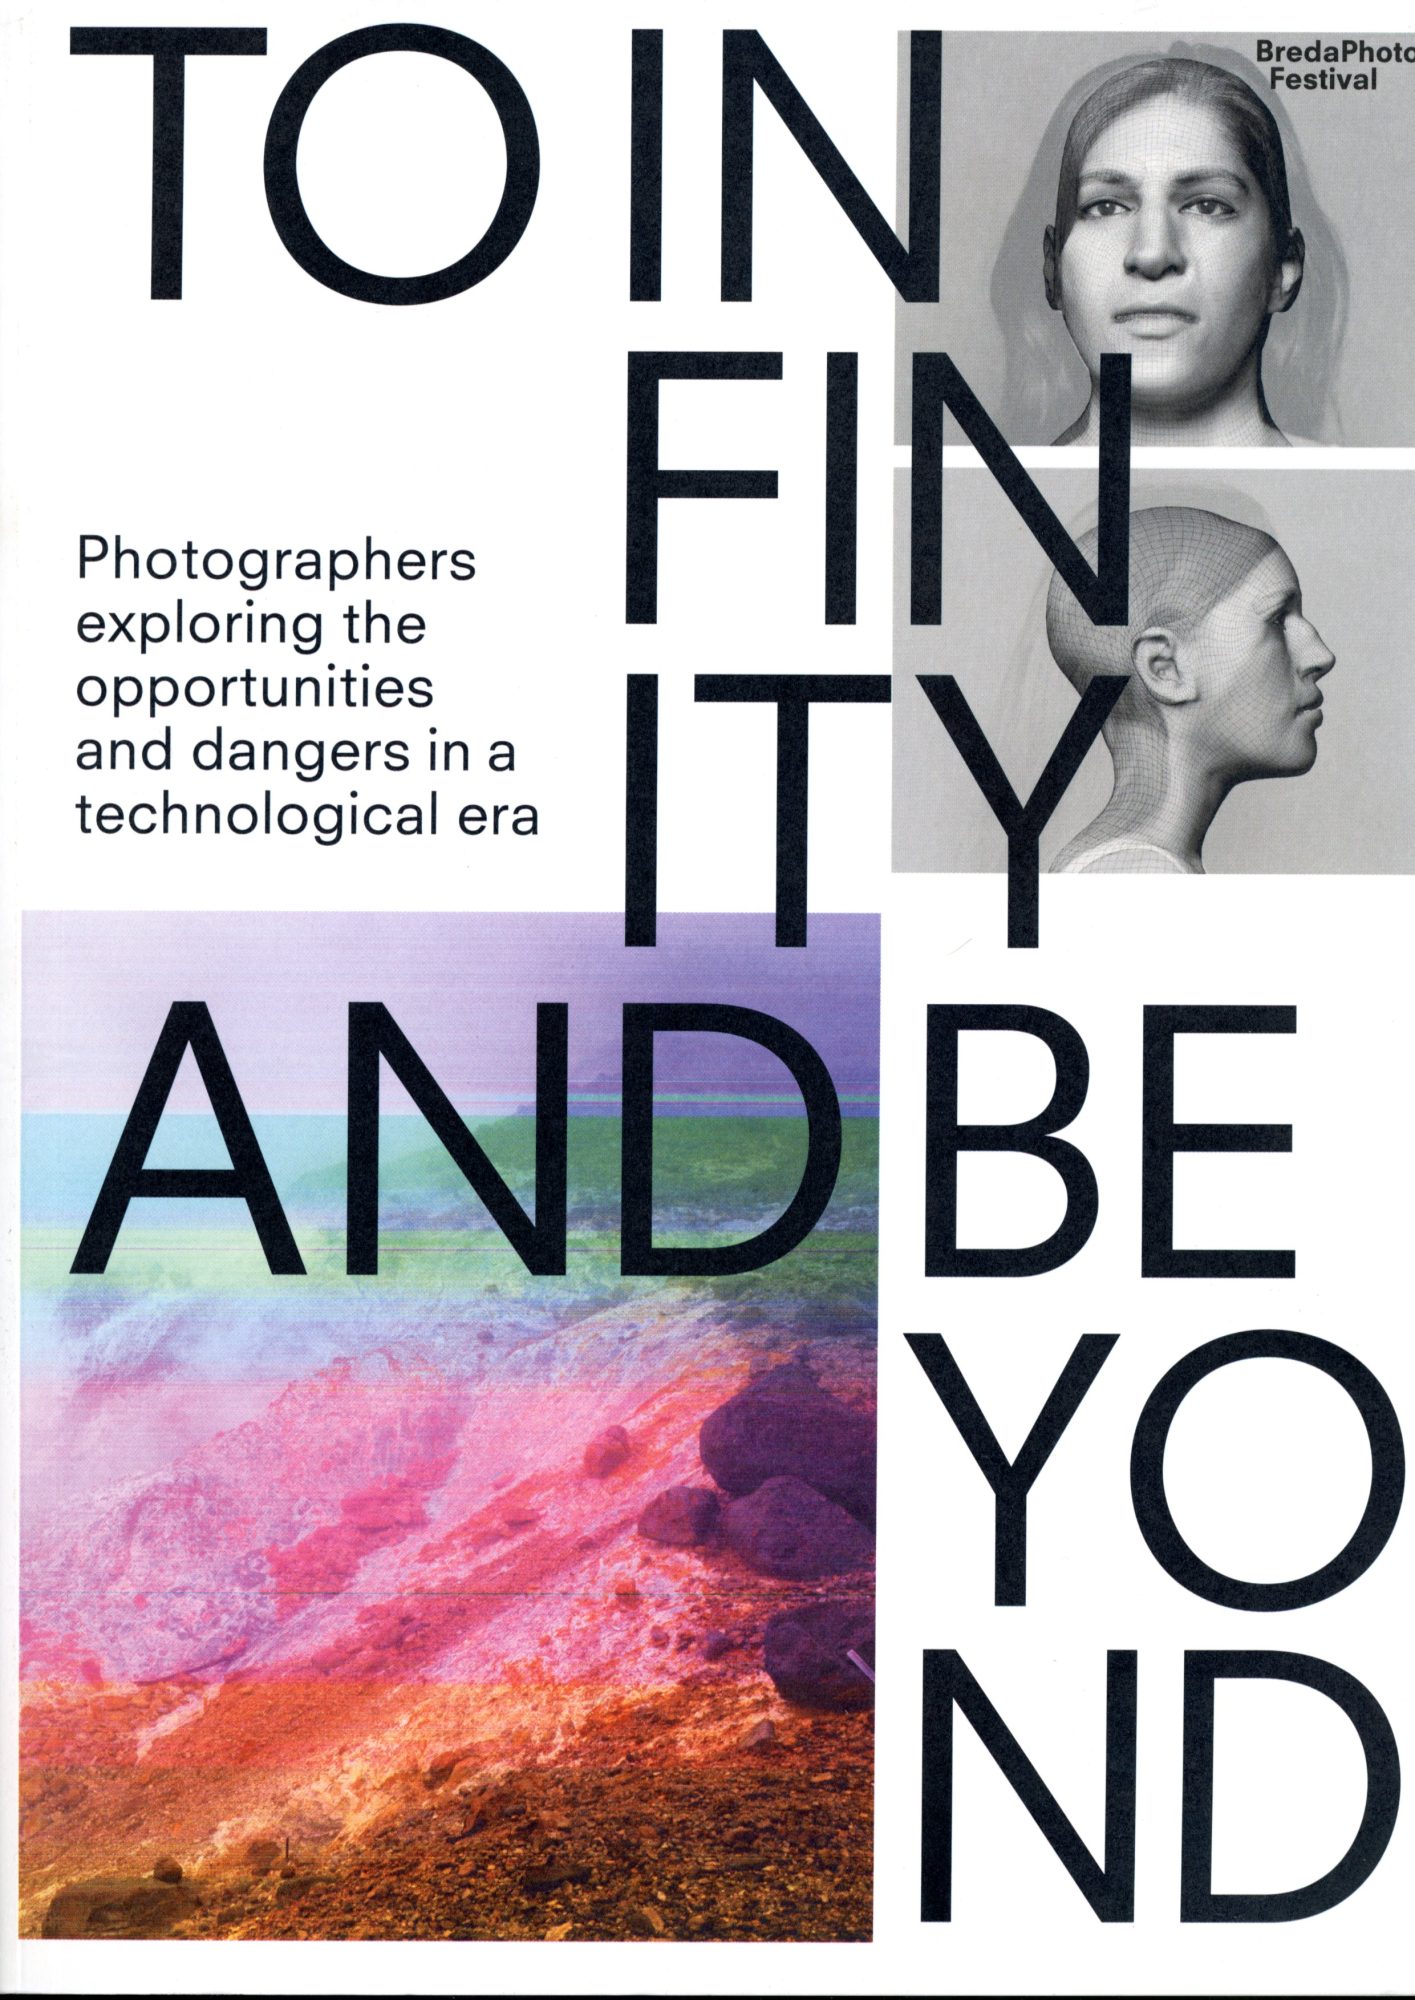 To Infinity and Beyond: Photographers Exploring the Opportunities and Dangers in a Technological Era BredaPhoto 2018